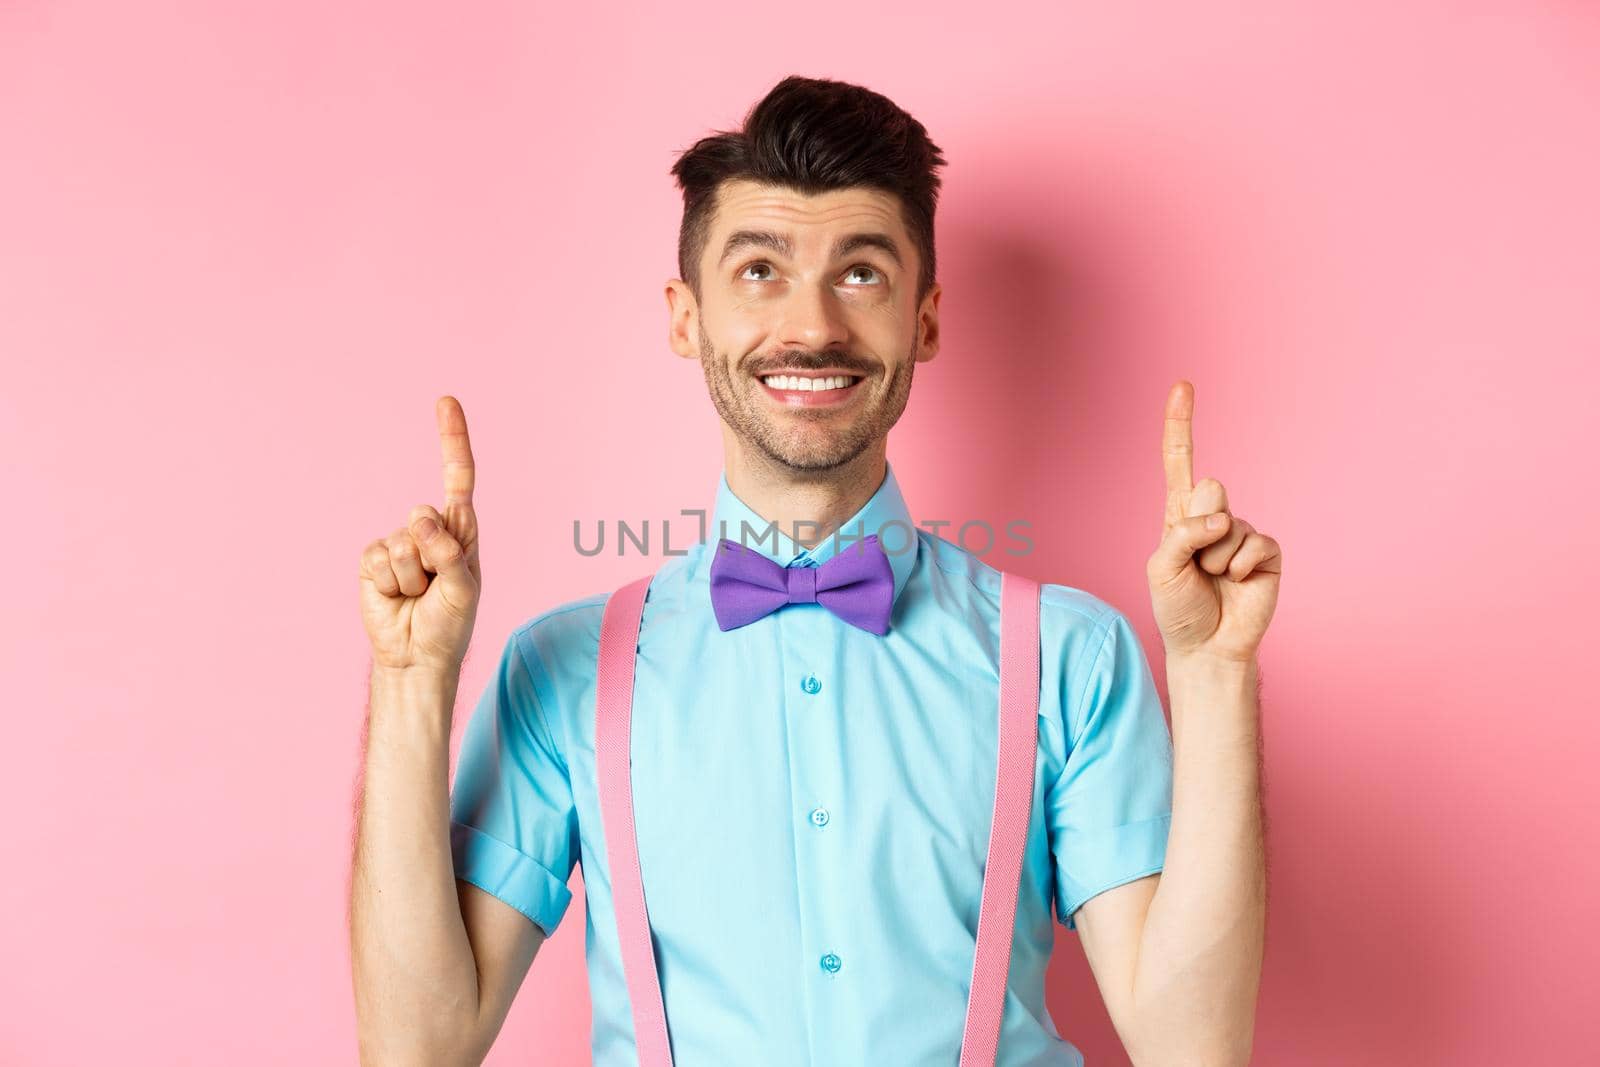 Happy smiling man in bow-tie pointing, looking up, showing something cool, standing on pink background.